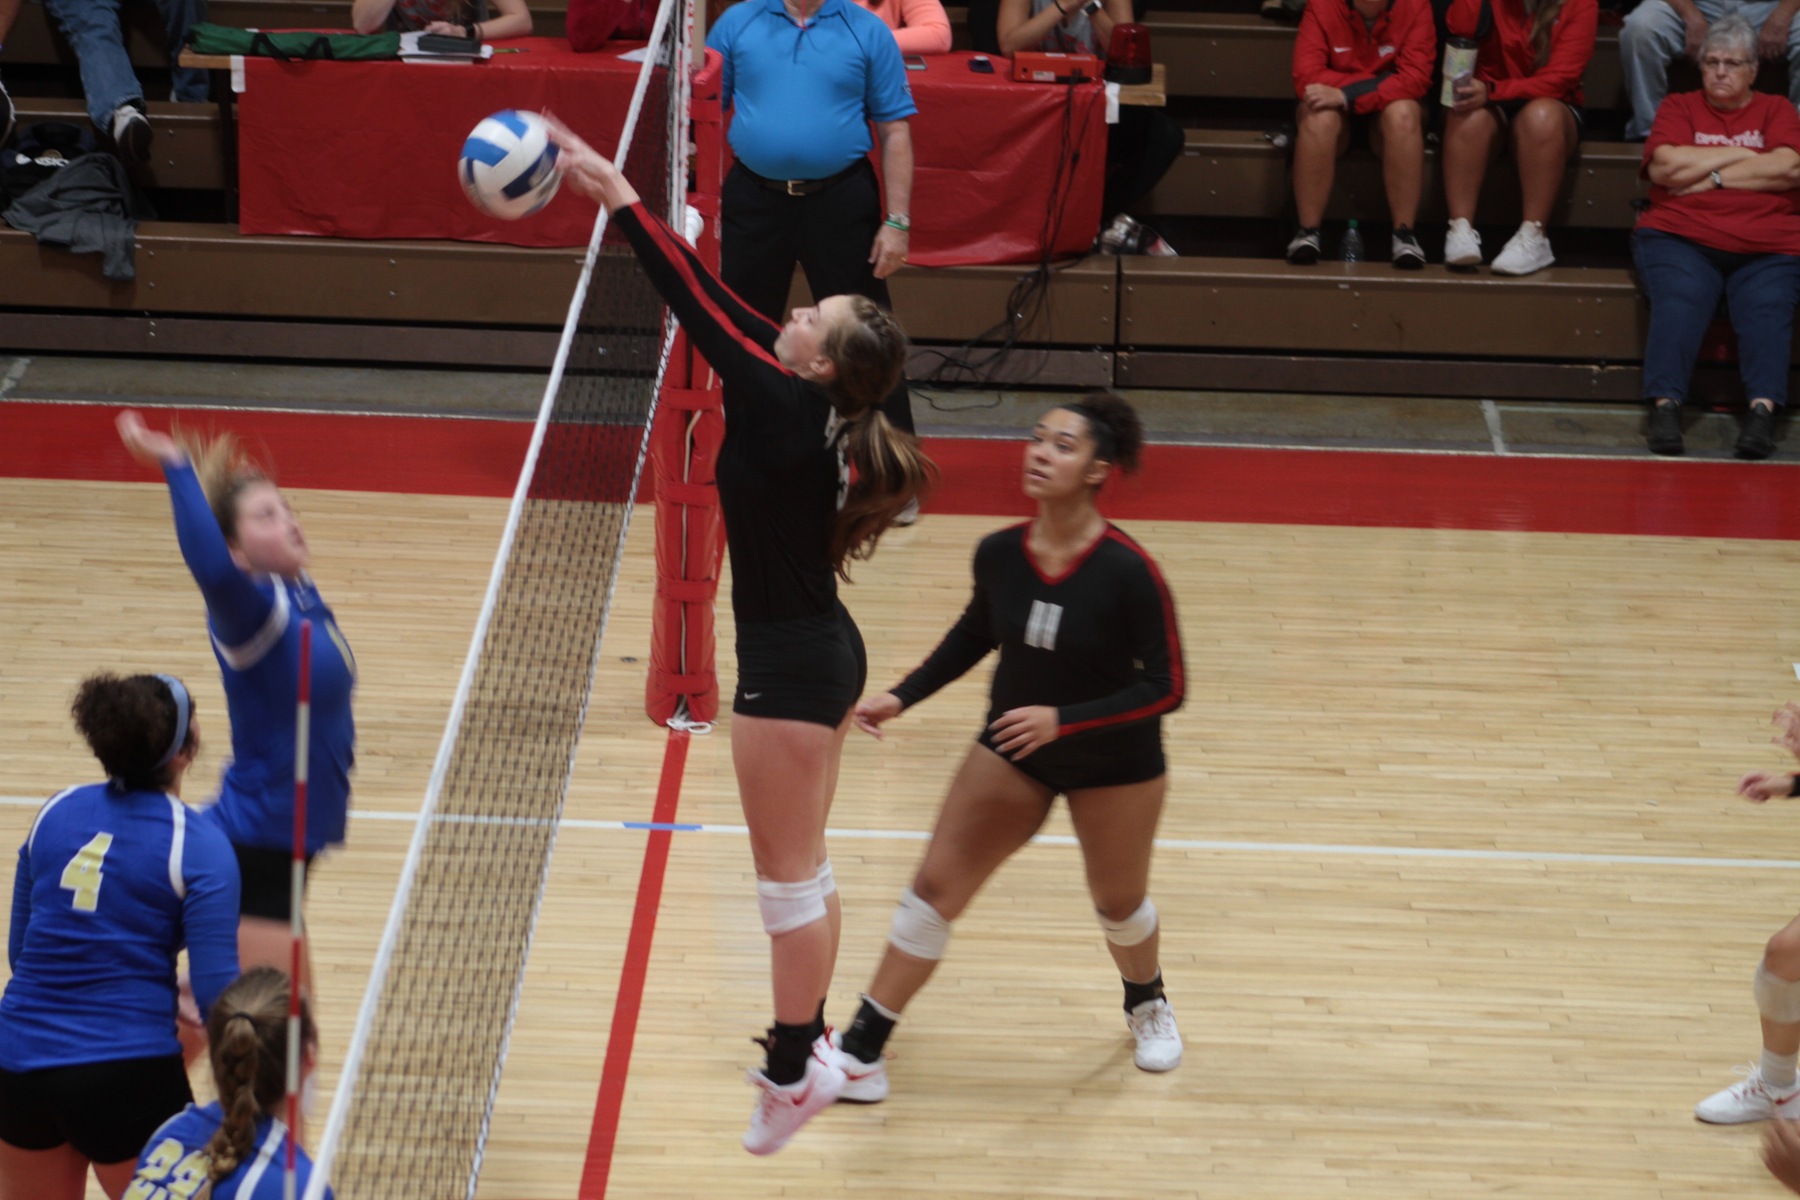 Back at #1, Red Ravens Sweep NEO